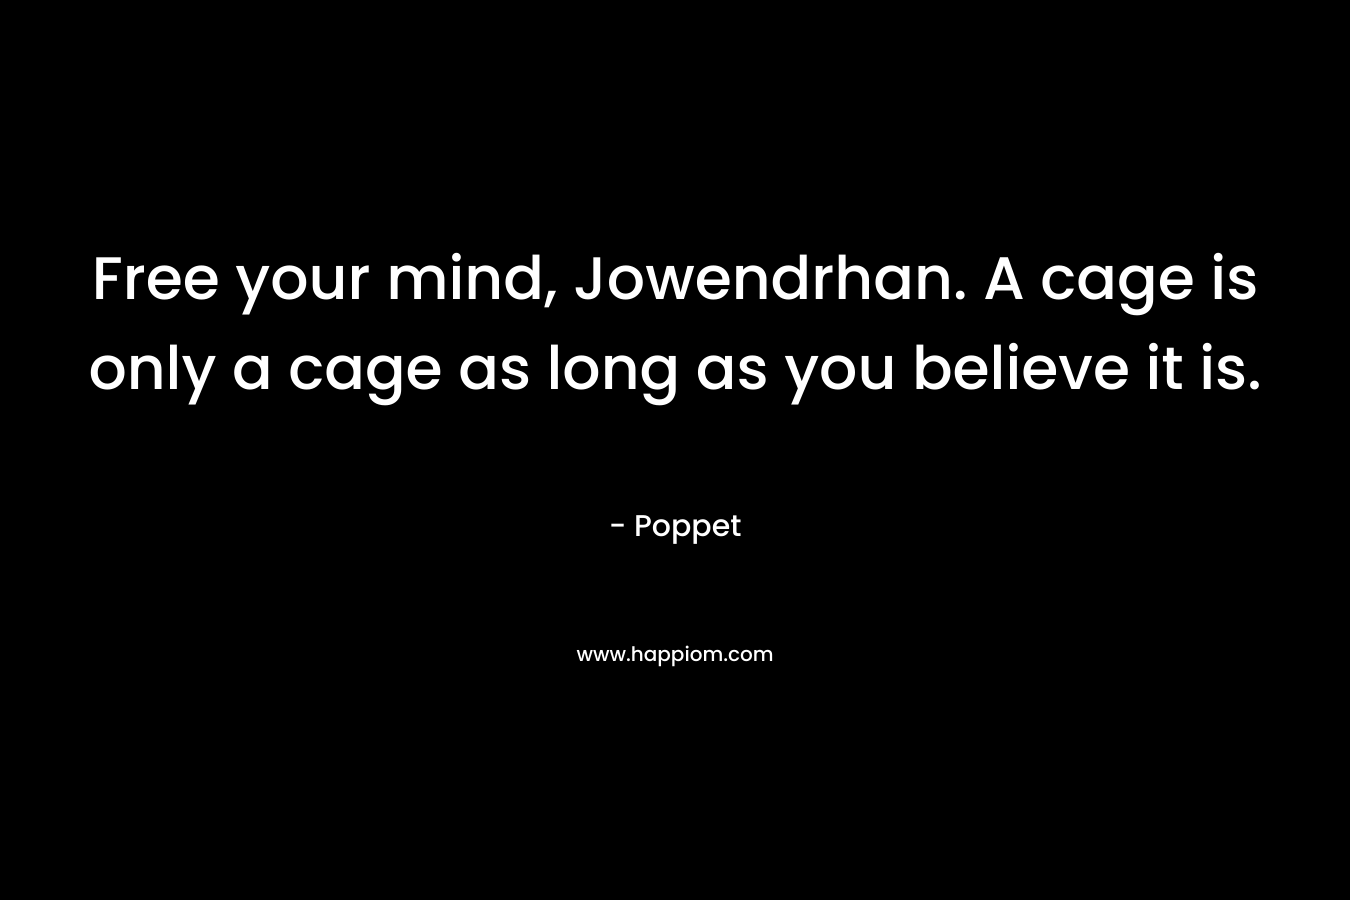 Free your mind, Jowendrhan. A cage is only a cage as long as you believe it is.